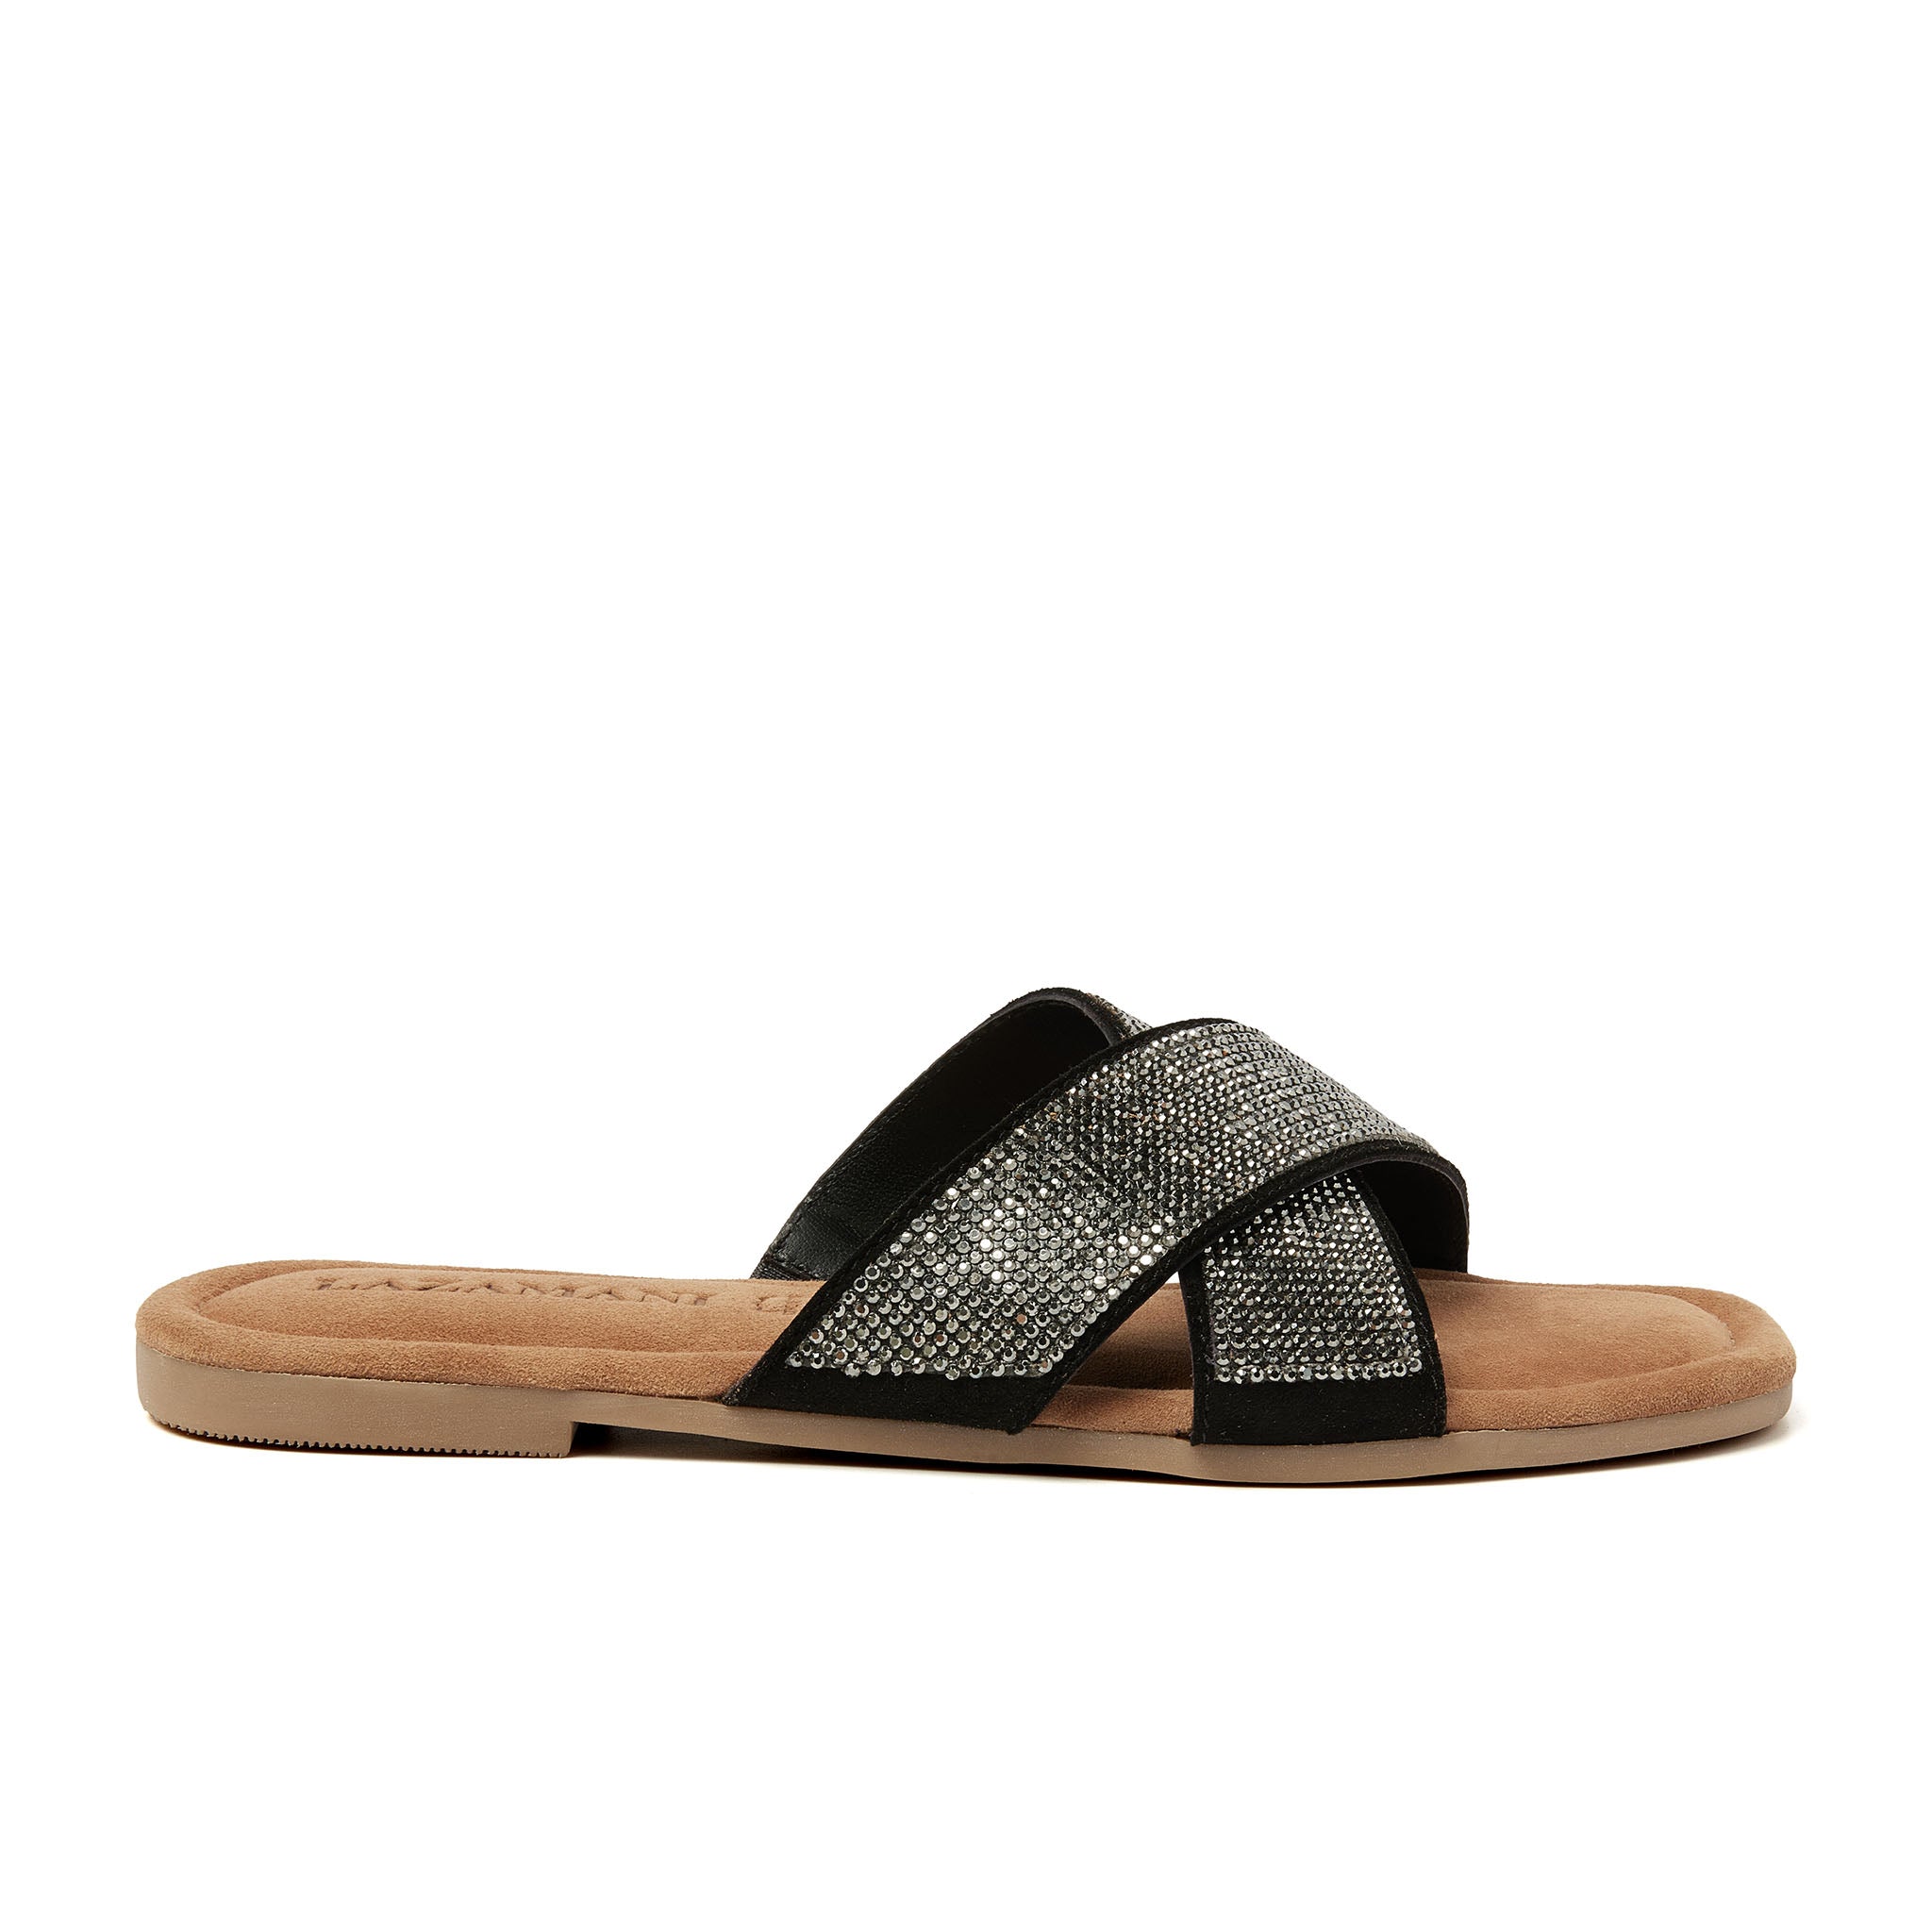 Lazamani Lexi Suede Dames Slippers Pewter